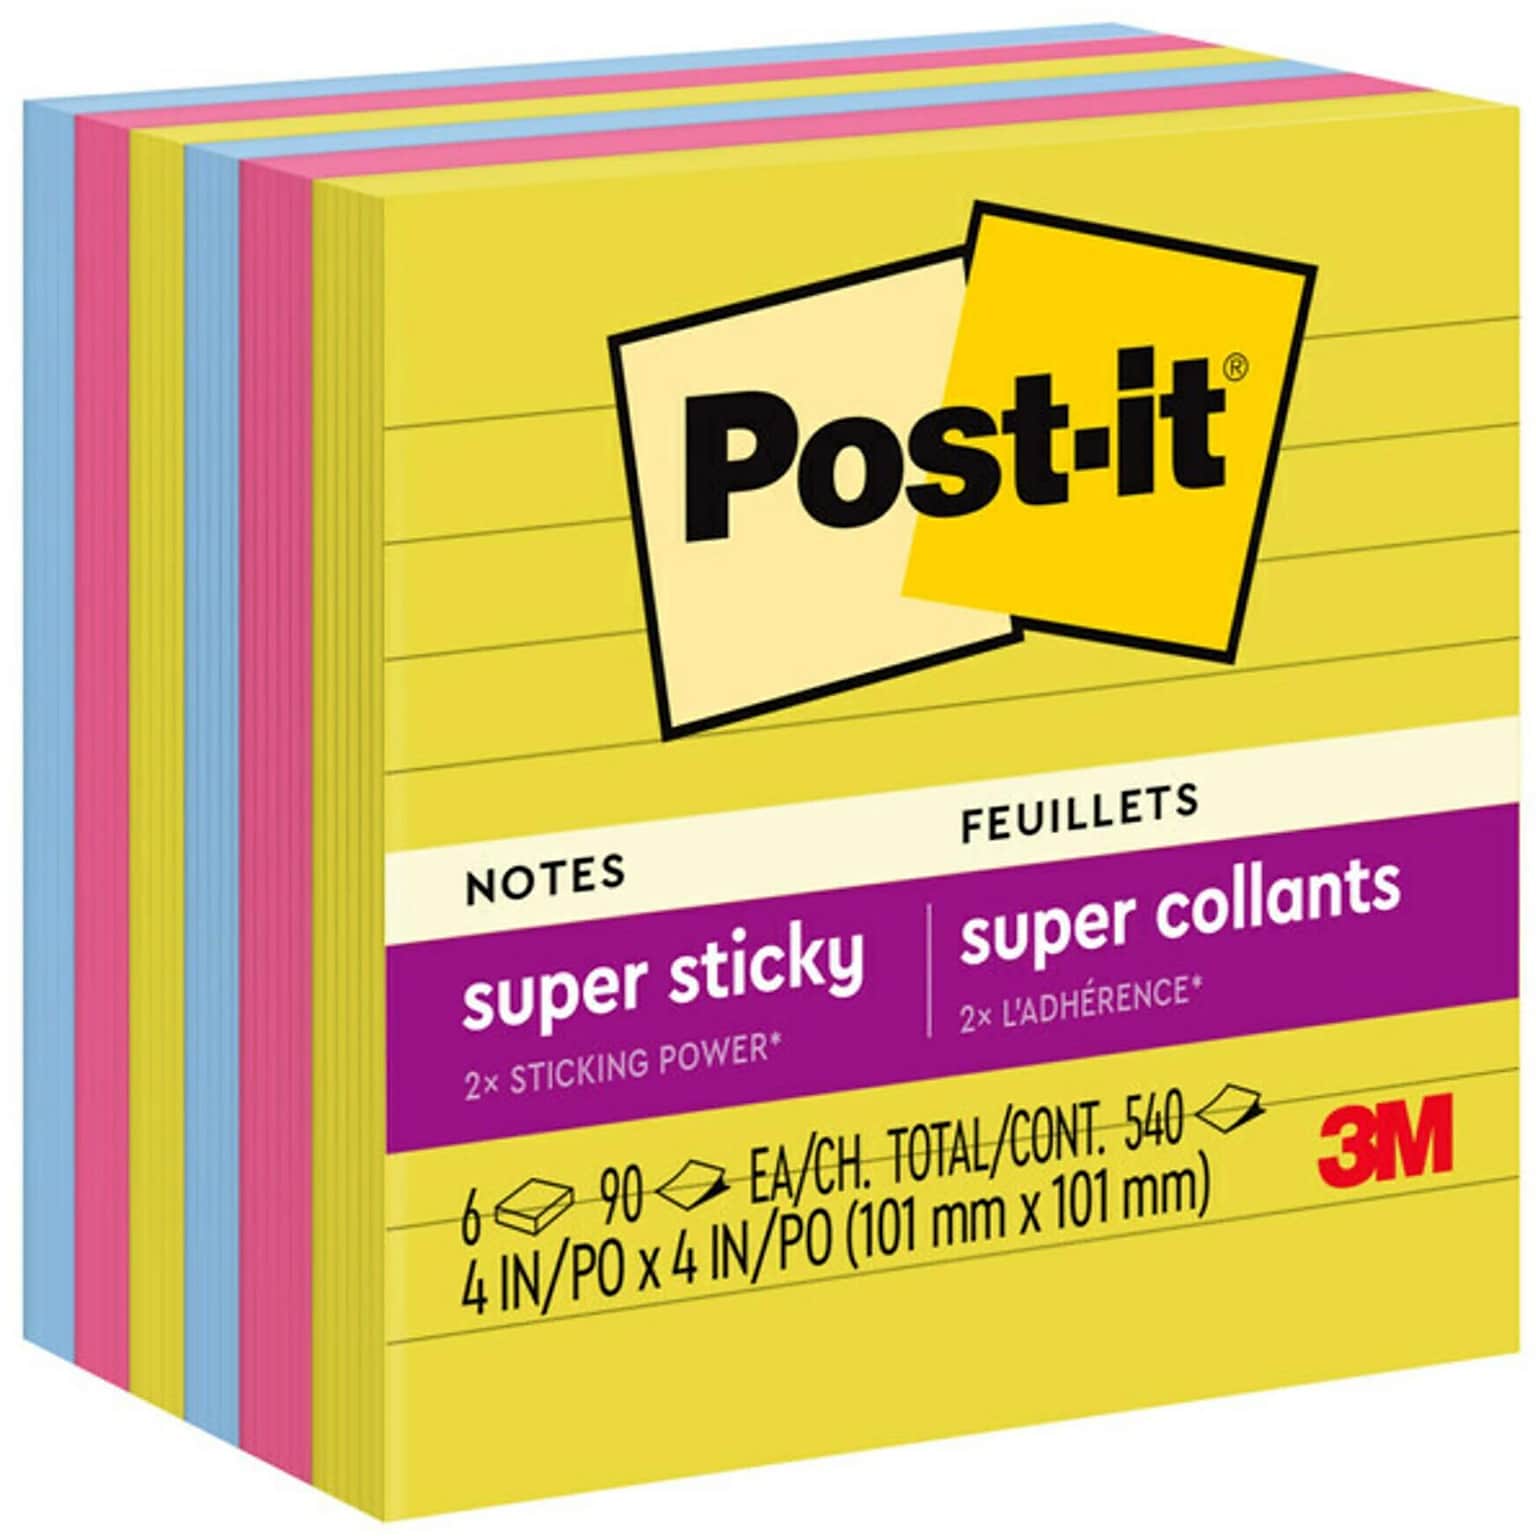 Post-it Super Sticky Notes, 4 x 4, Summer Joy Collection, Lined, 90 Sheet/Pad, 6 Pads/Pack (675-6SSJOY)